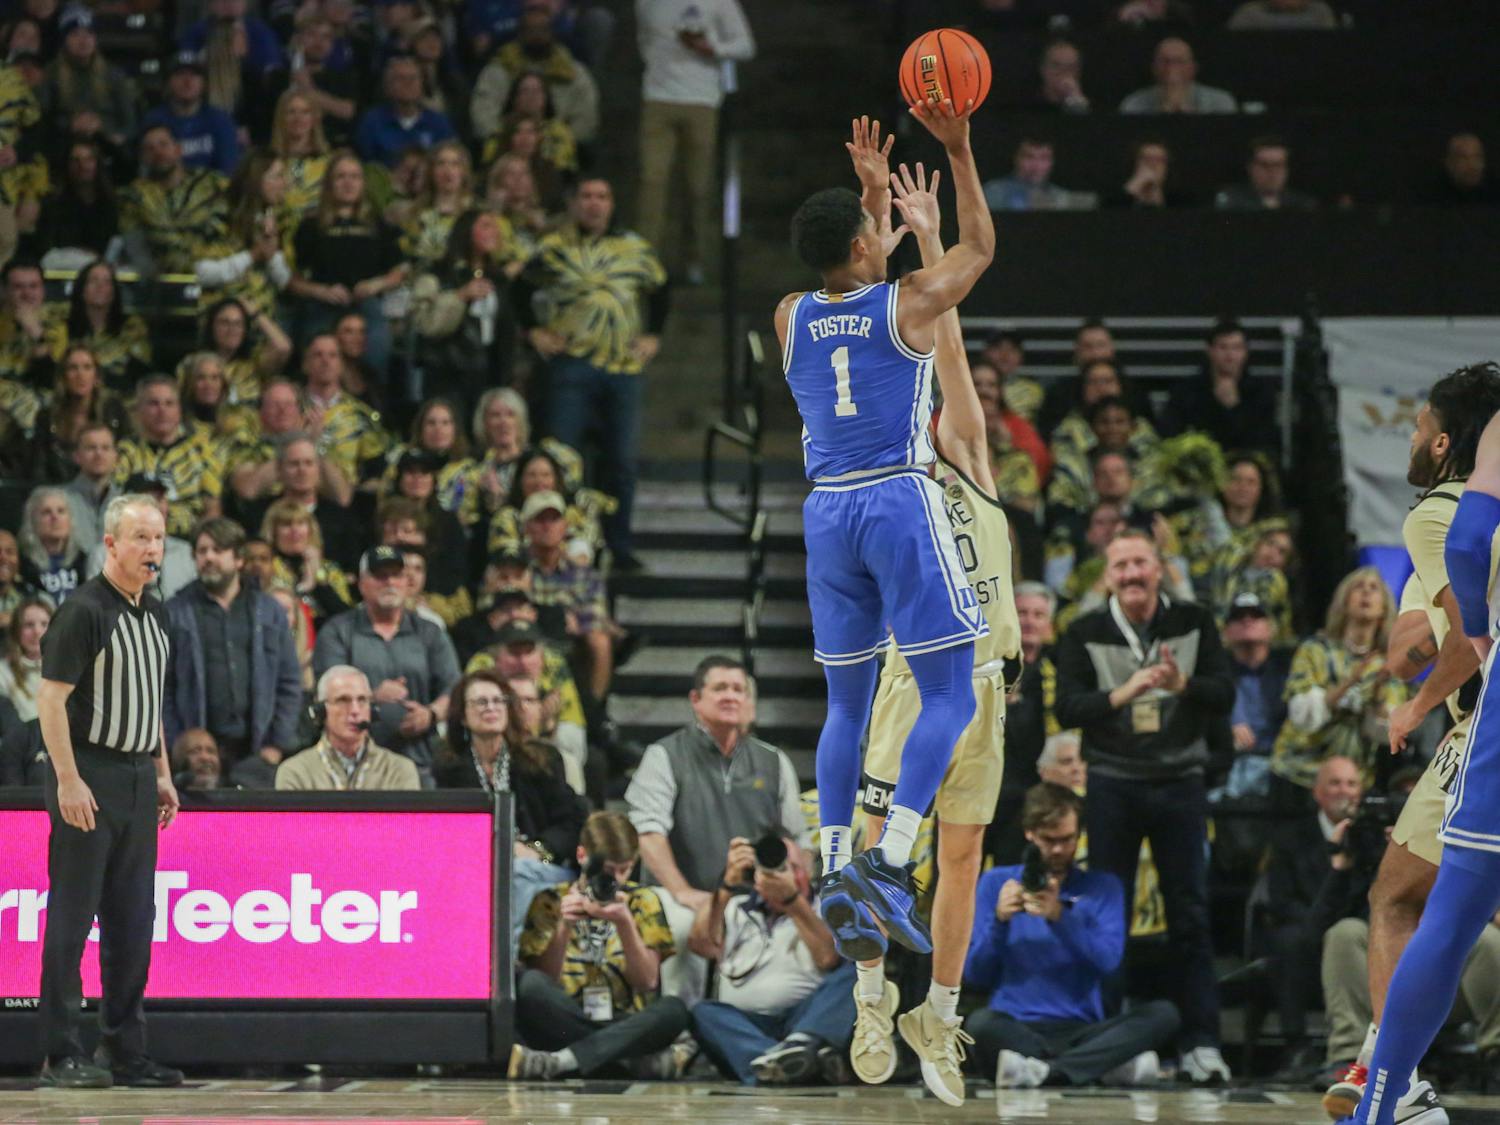 Freshman guard Caleb Foster takes a shot in Duke's game against Wake Forest, his last appearance of the season.